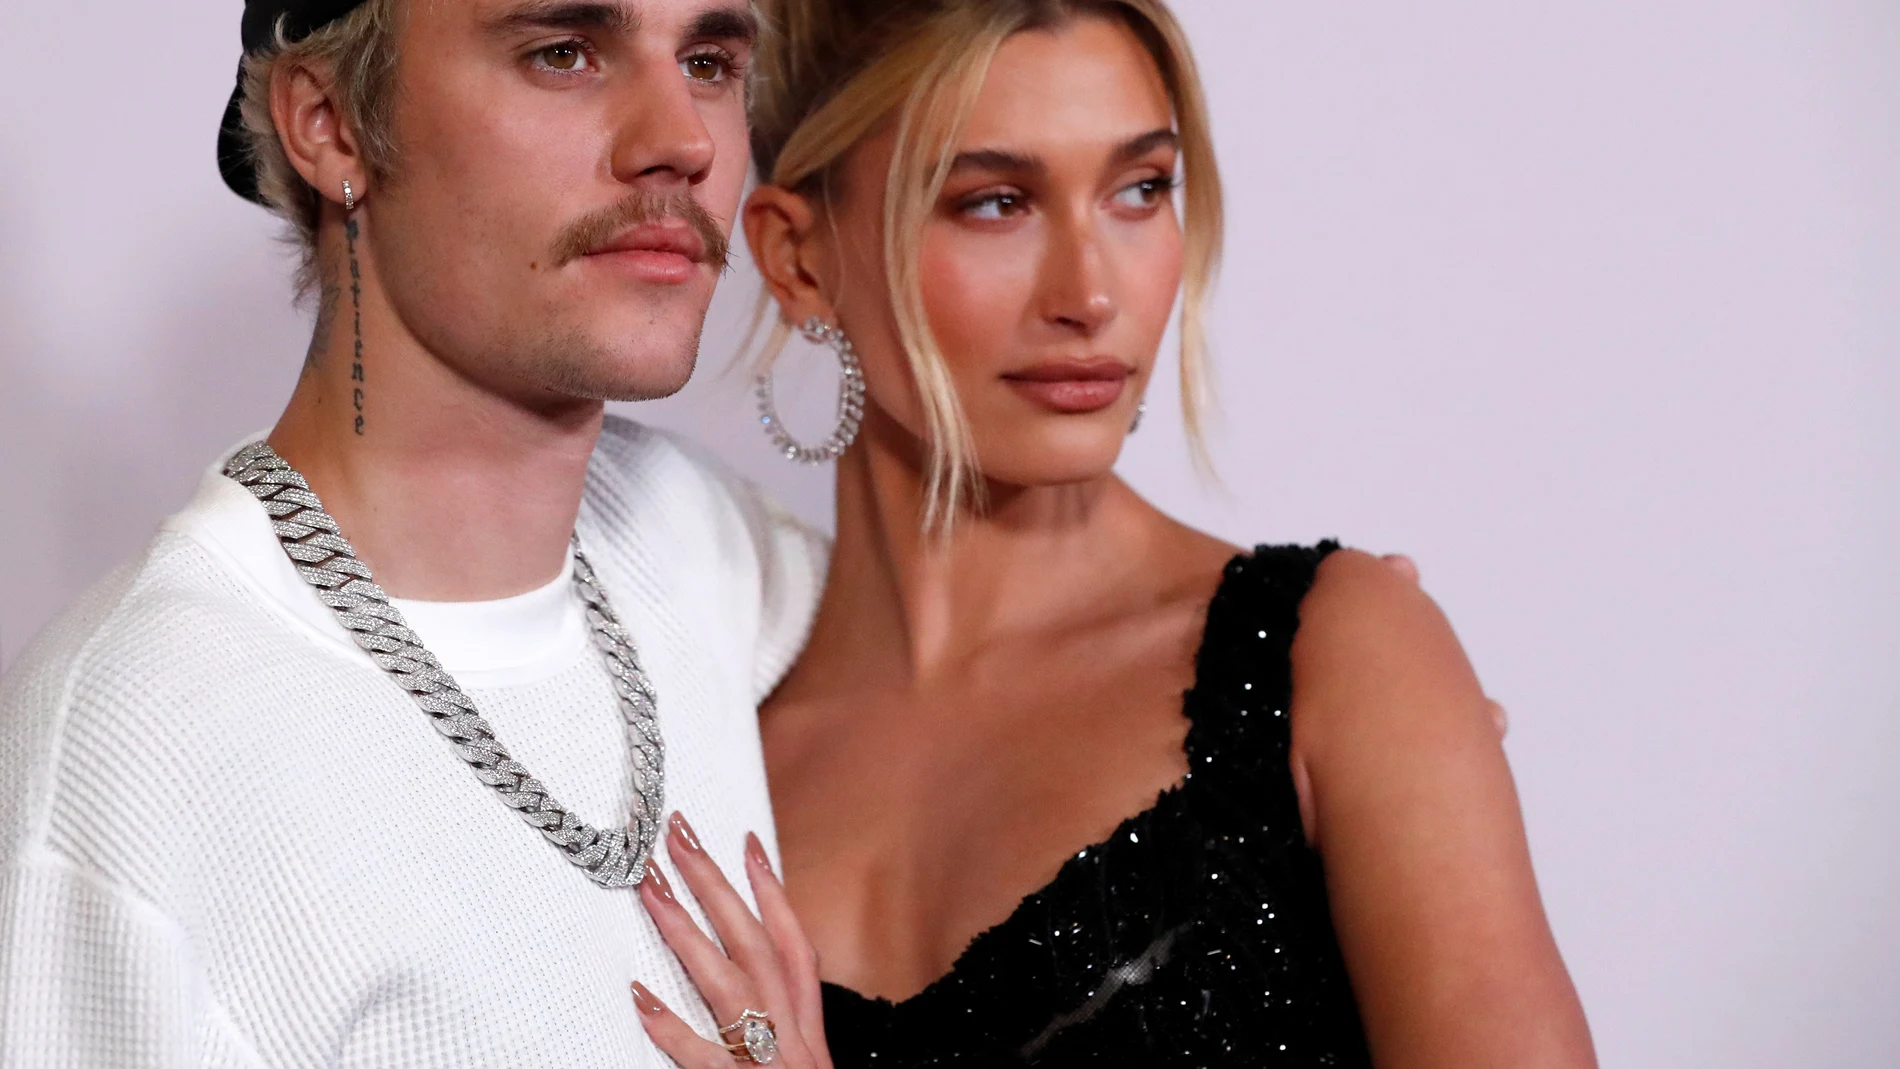 Singer Bieber and his wife Hailey Baldwin pose at the premiere for the documentary television series "Justin Bieber: Seasons" in Los Angeles